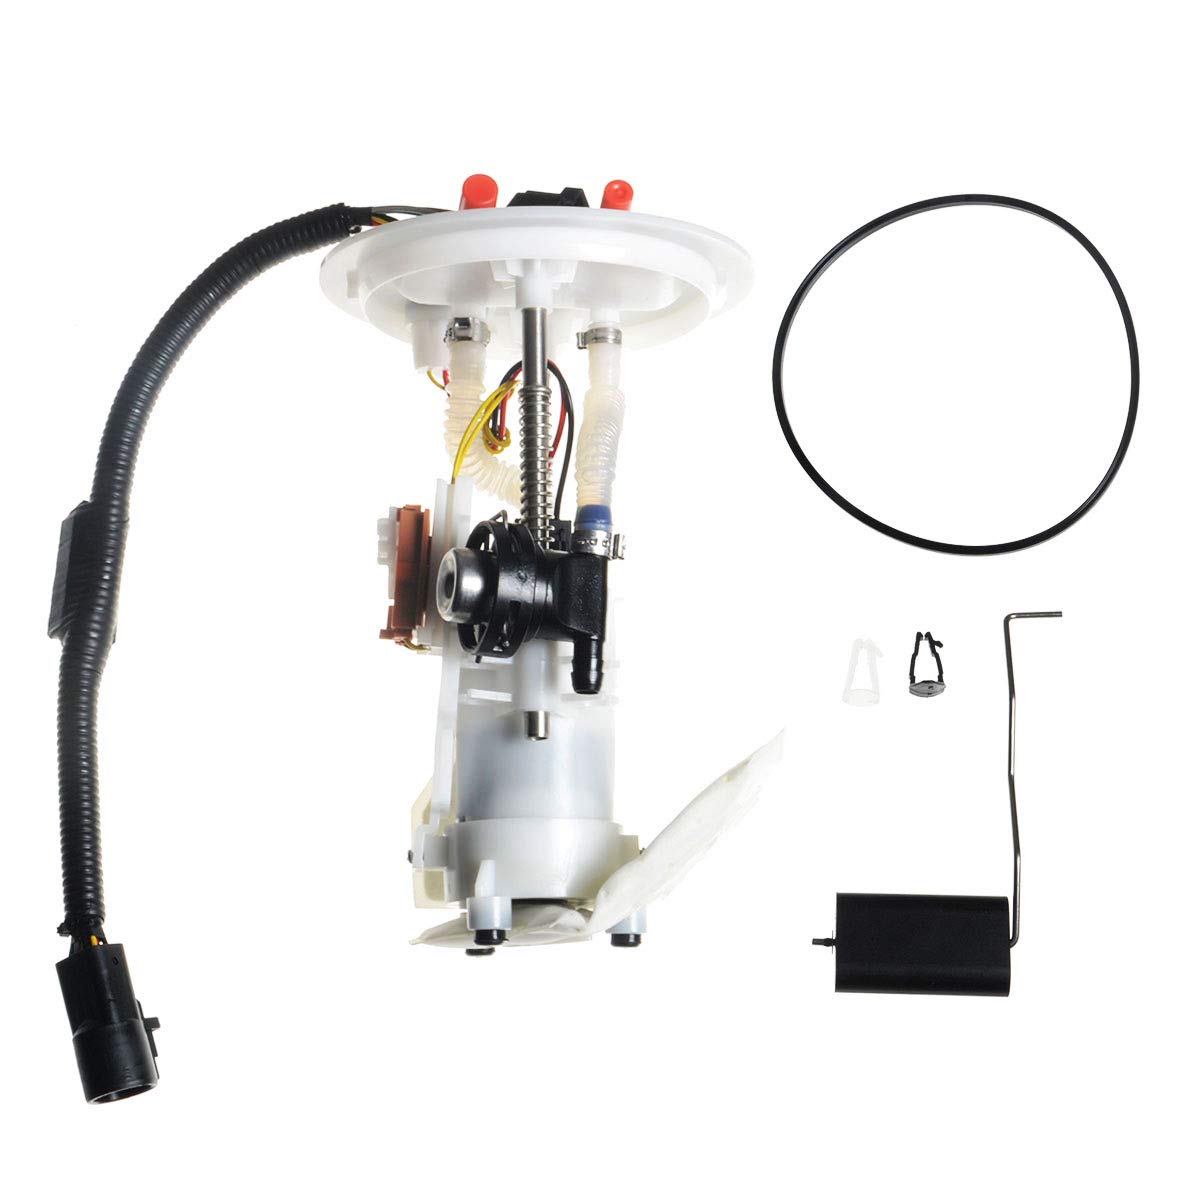 A-Premium Electric Fuel Pump Module Assembly Replacement for Ford Explorer Mercury Mountaineer 2001-2003 V6 4.0L E2338M